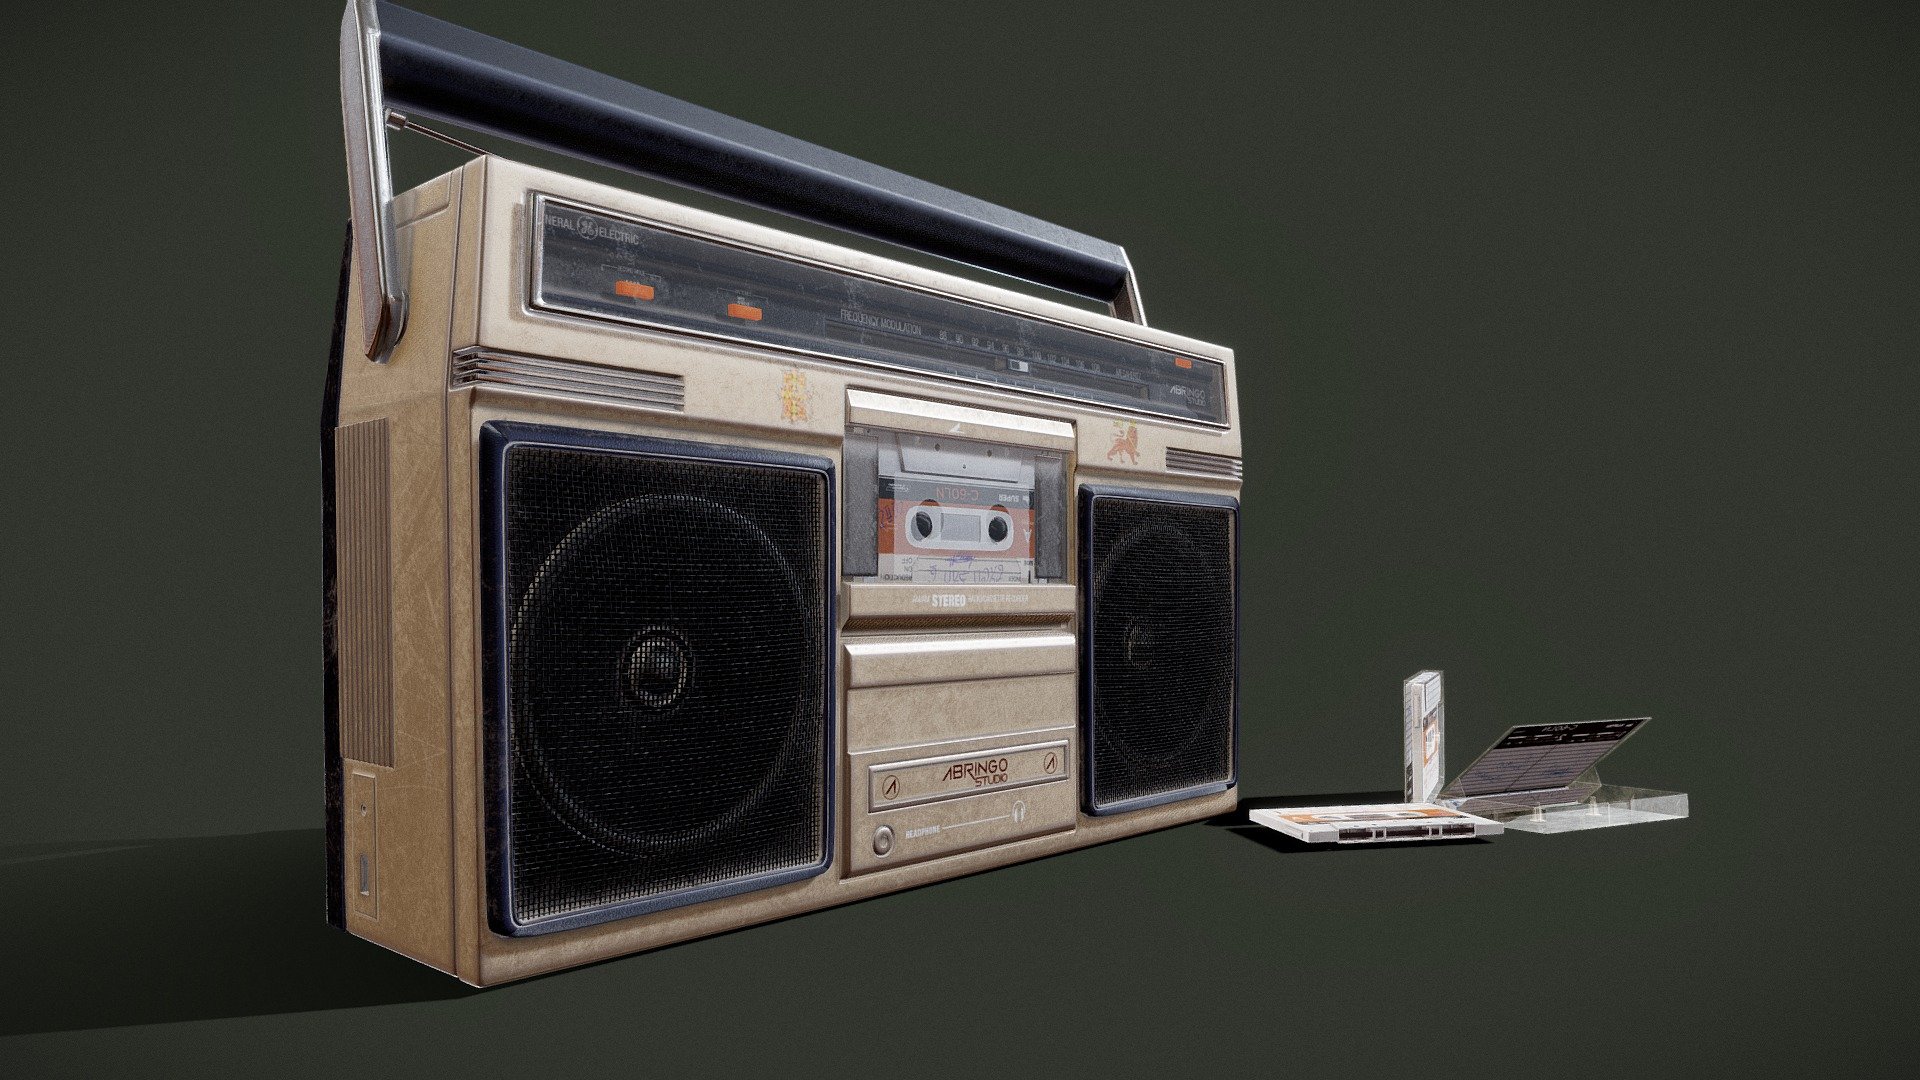 Retro Cassette Recorder Player with AM FM, Vintage Cassette Player with Big Speaker,Headphone Jack,Powered by 4AA Batteries,

Modeling and texturing with blender and substance painter - Vintage tape recorder radio - 3D model by Abringo 3d model